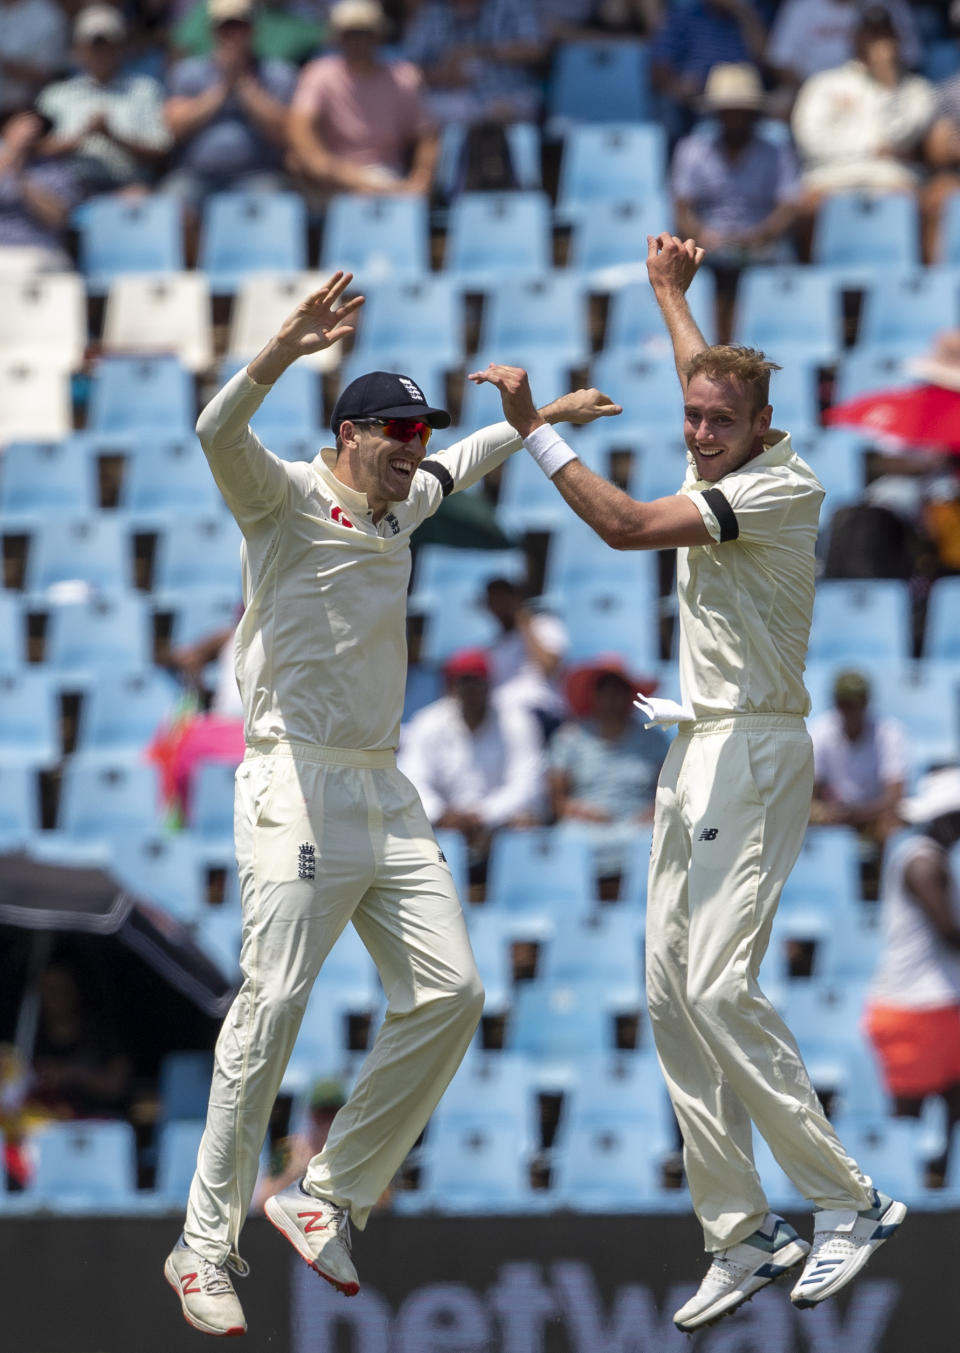 England's bowler Stuart Broad, right, celebrates with teammate Craig Overton after dismissing South Africa's captain Faf du Plessis for 29 runs on day one of the first cricket test match between South Africa and England at Centurion Park, Pretoria, South Africa, Thursday, Dec. 26, 2019. (AP Photo/Themba Hadebe)